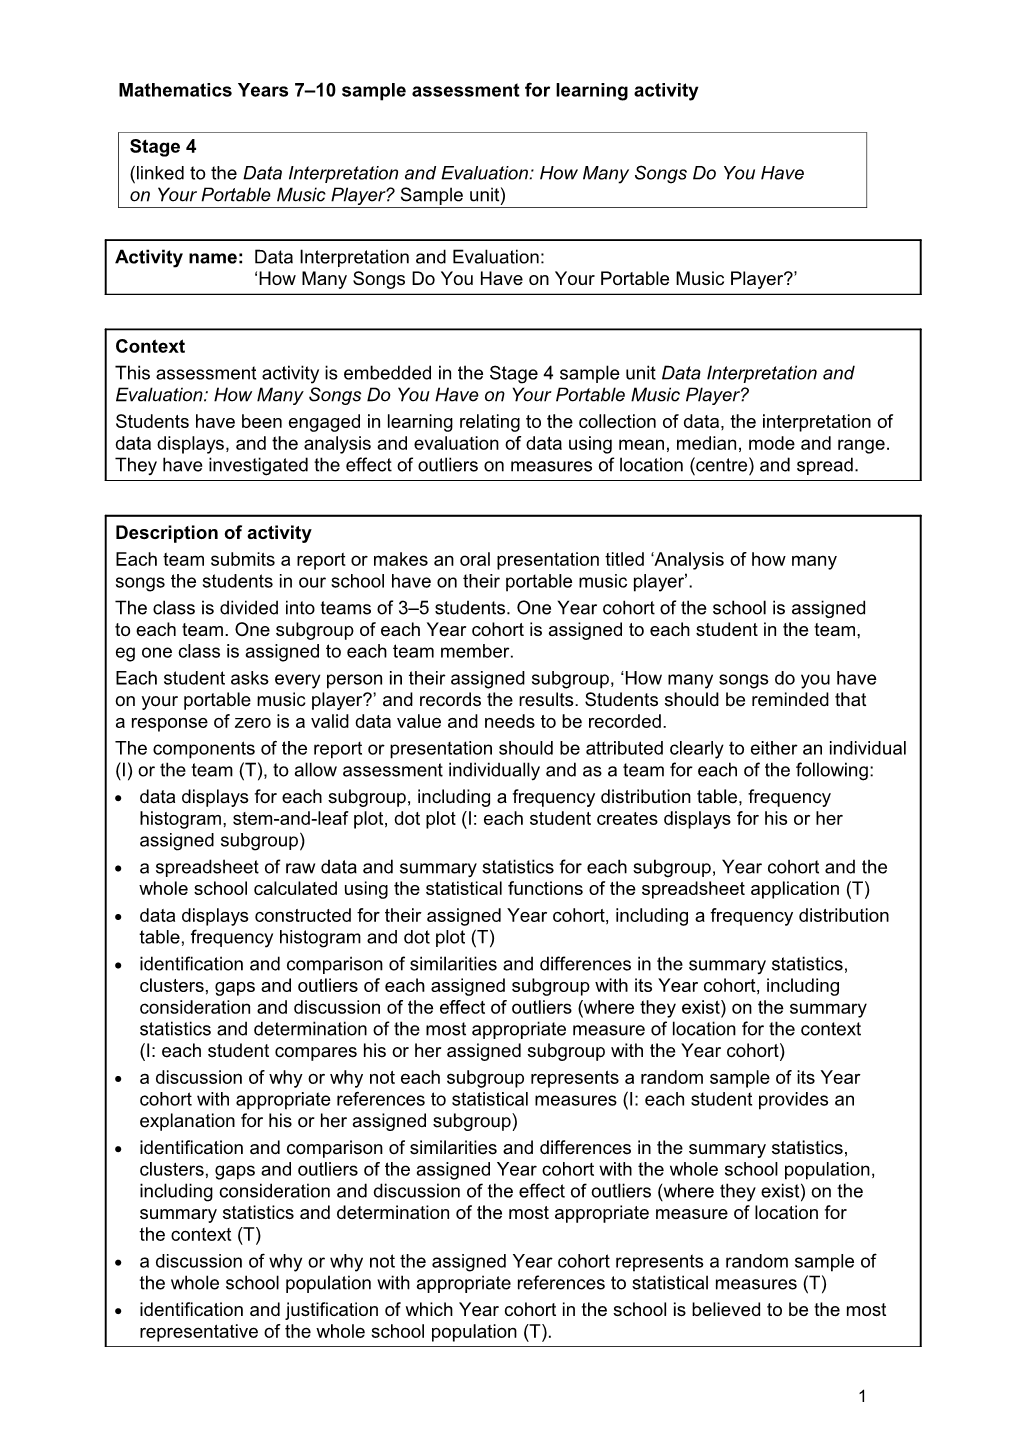 Mathematics Years 7 10 Sample Assessment for Learning Activity